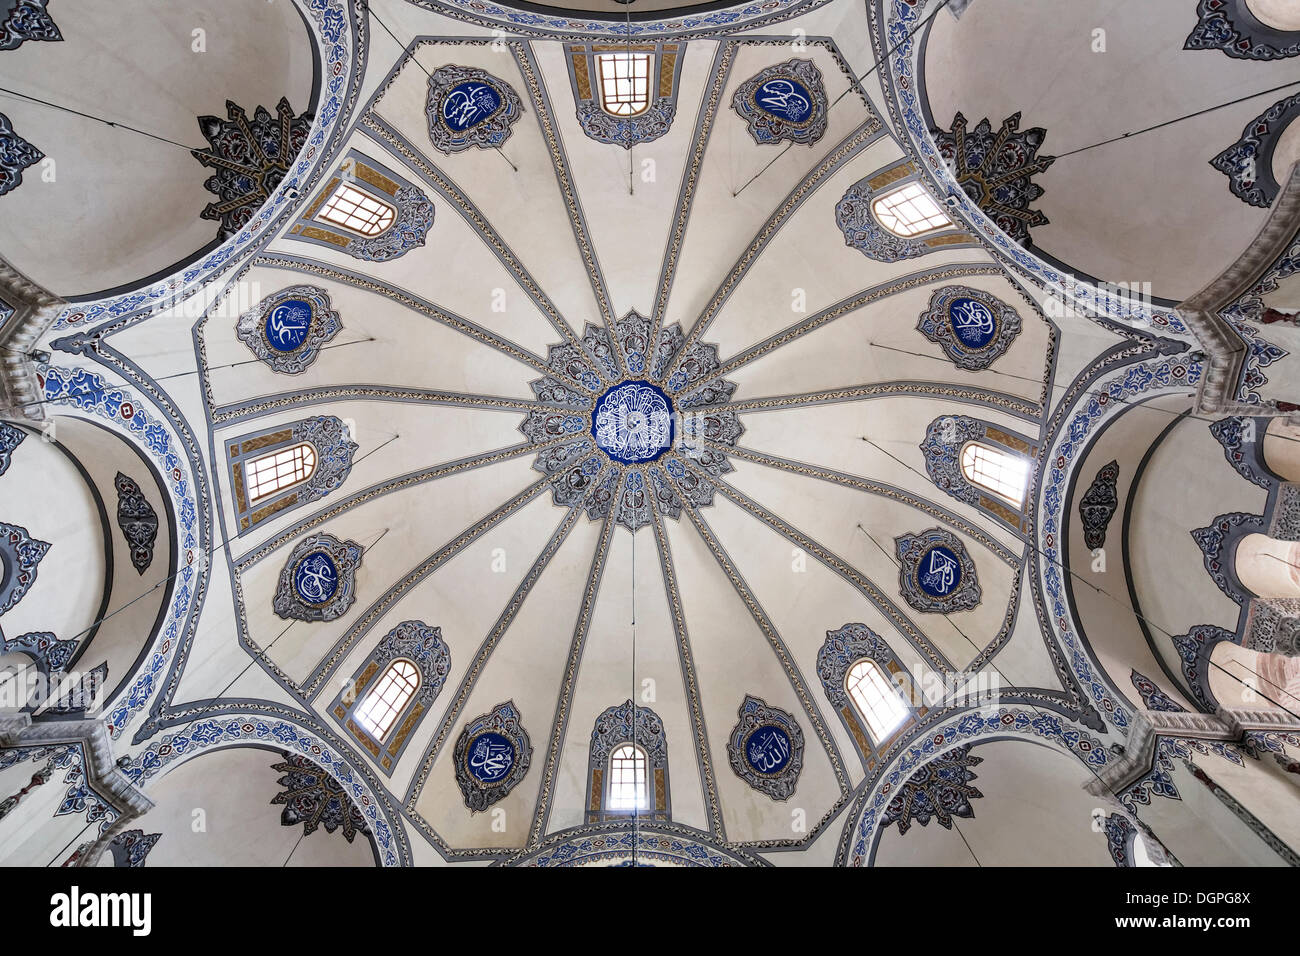 Domed ceiling, former Orthodox Church of Sergius and Bacchus, today a mosque, Kuecuek Aya Sofya Camii, Little Hagia Sophia Stock Photo